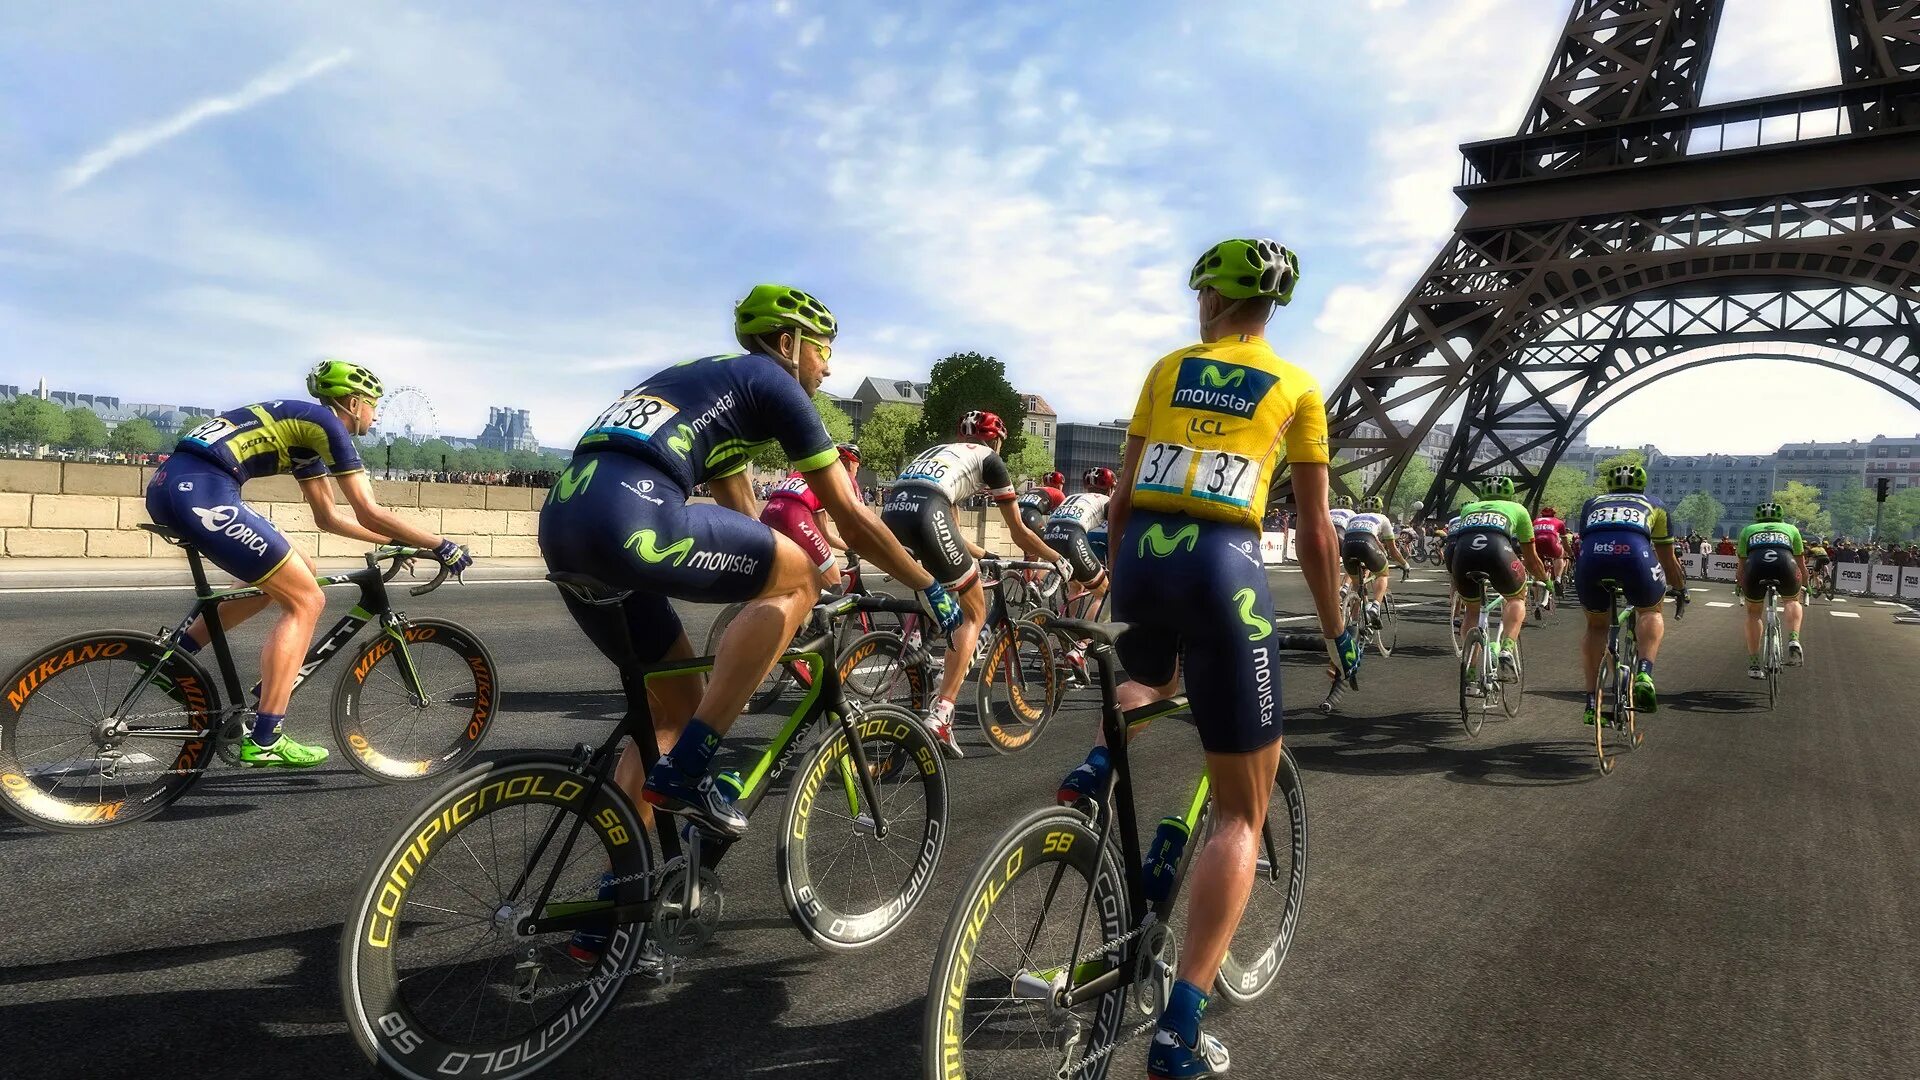 Tour de France 2017 (ps4). Pro Cycling Manager 2017. Pro Cycling Manager 2011. Pro Cycling Manager / Tour de France 2007 [PSP][Full][Eng]. Pro cycling